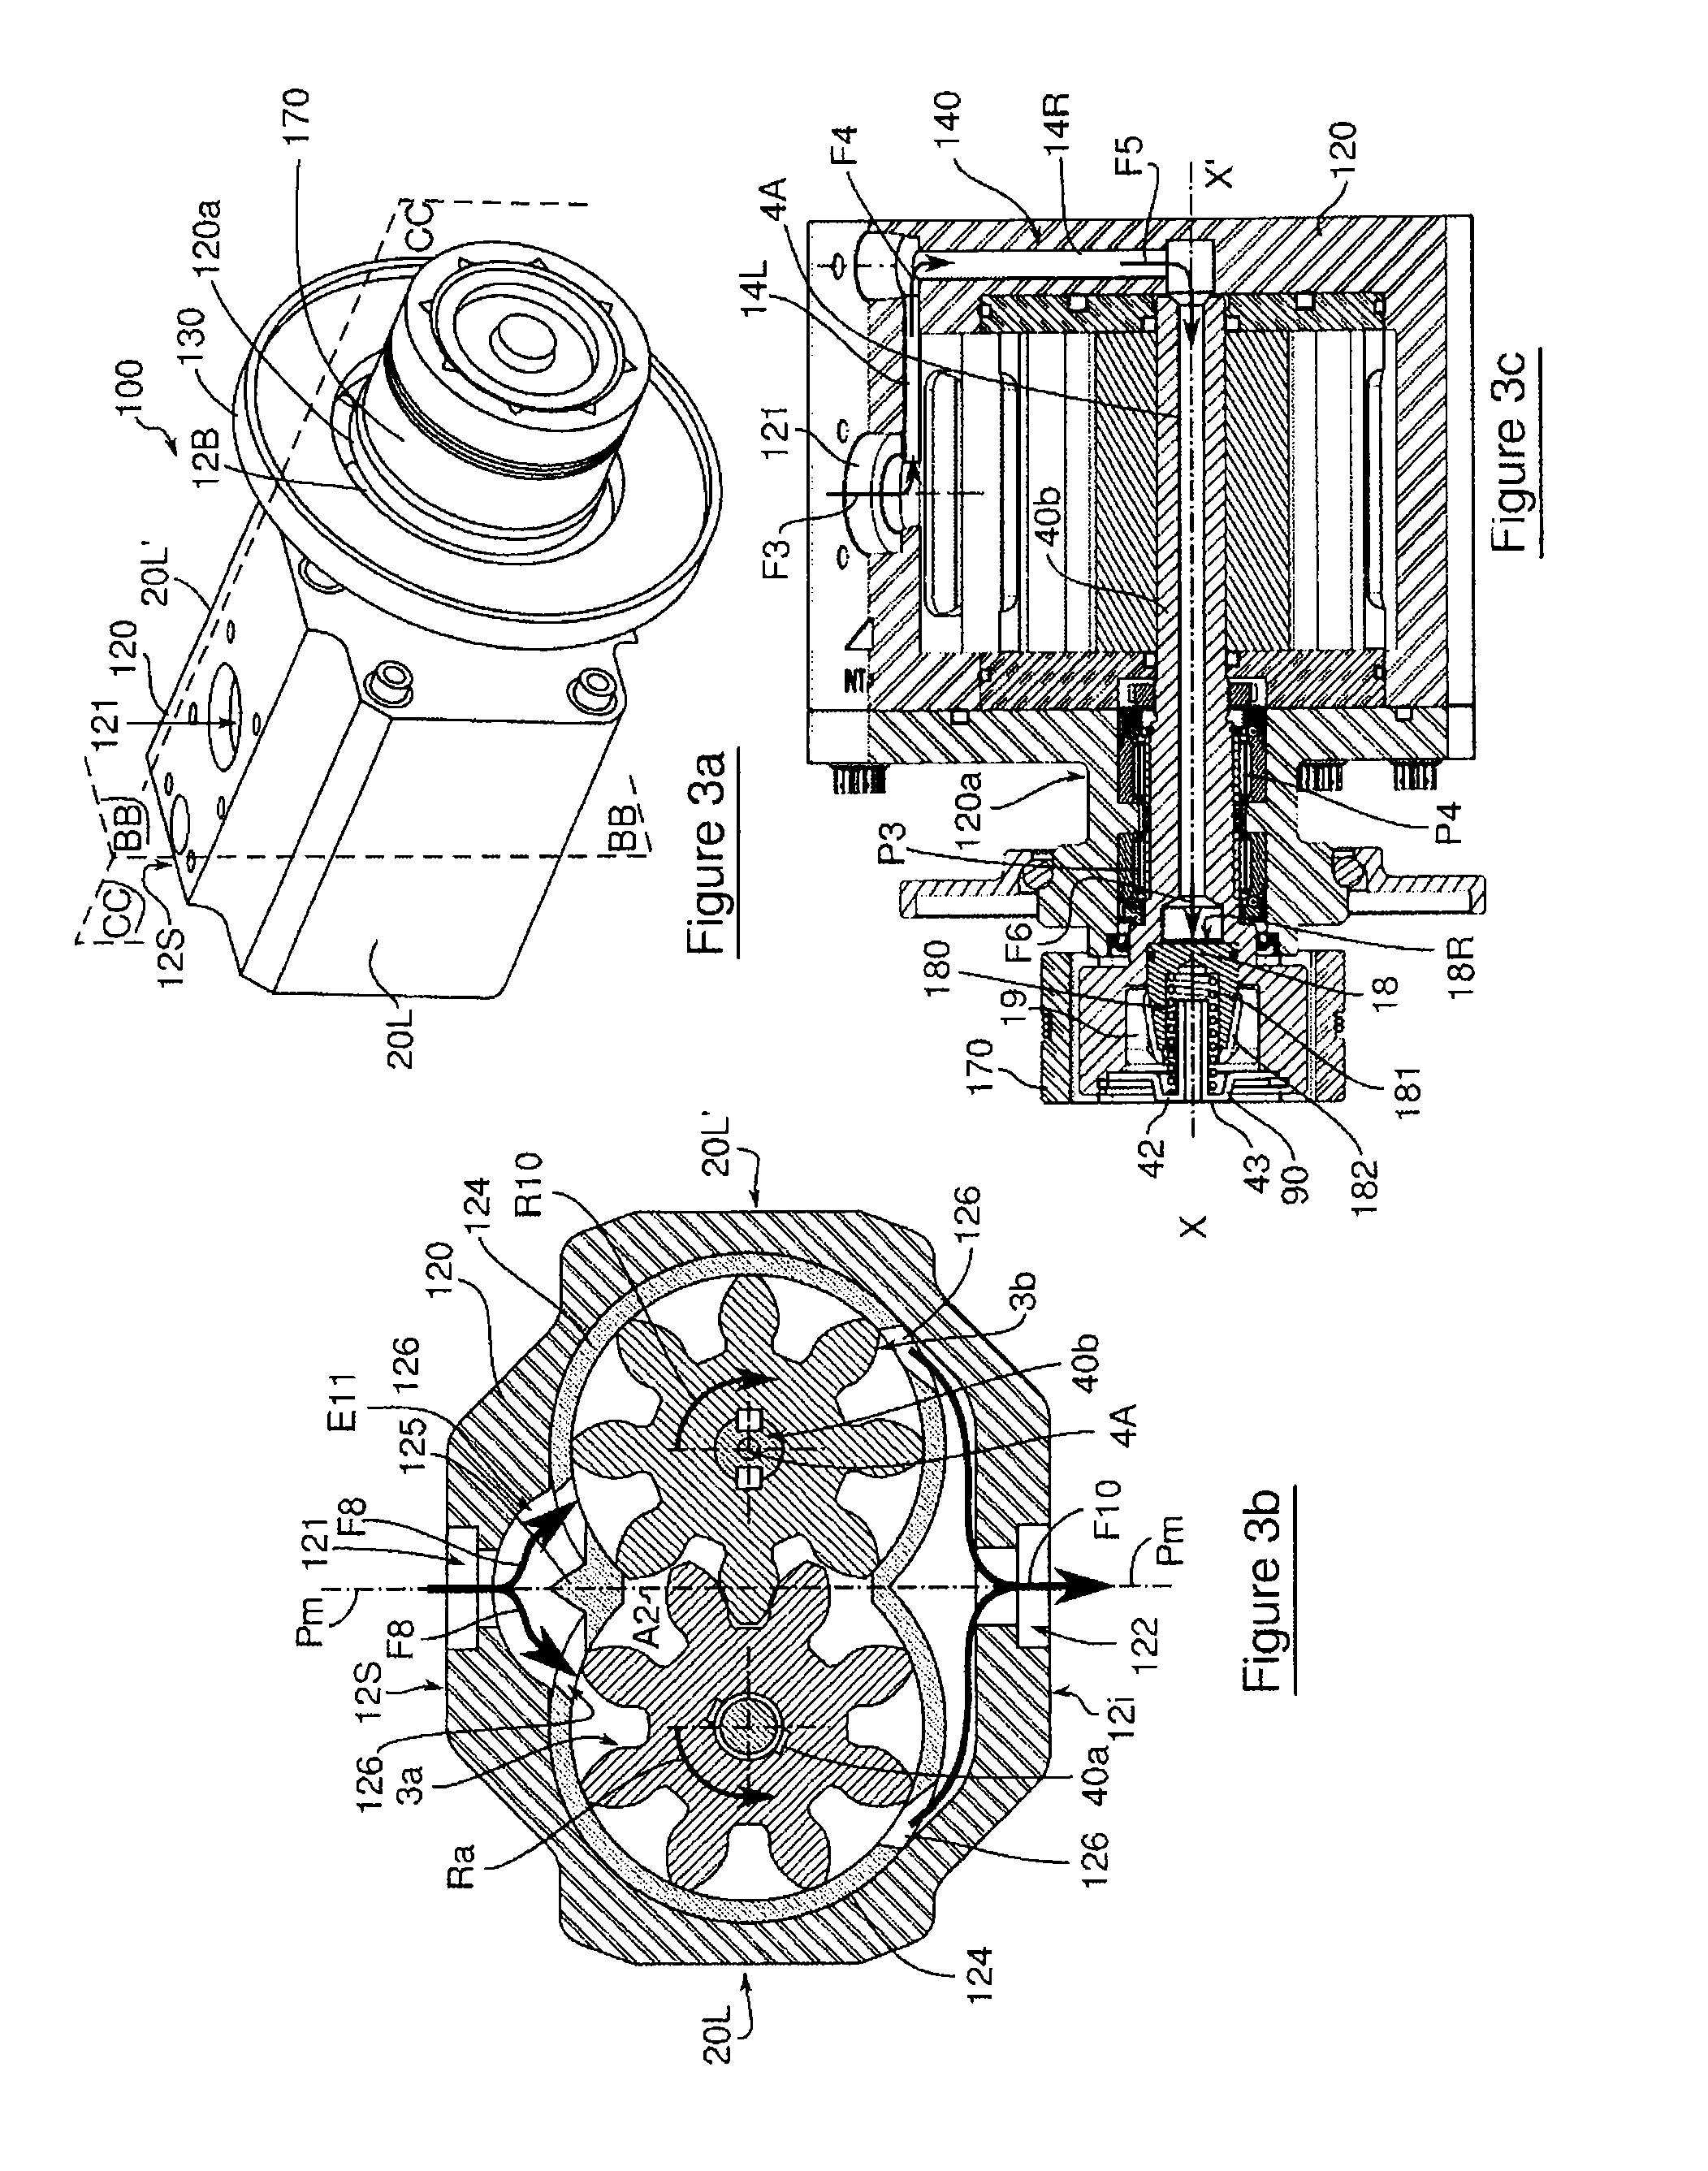 Method and system for the emergency start-up of an energy generator set